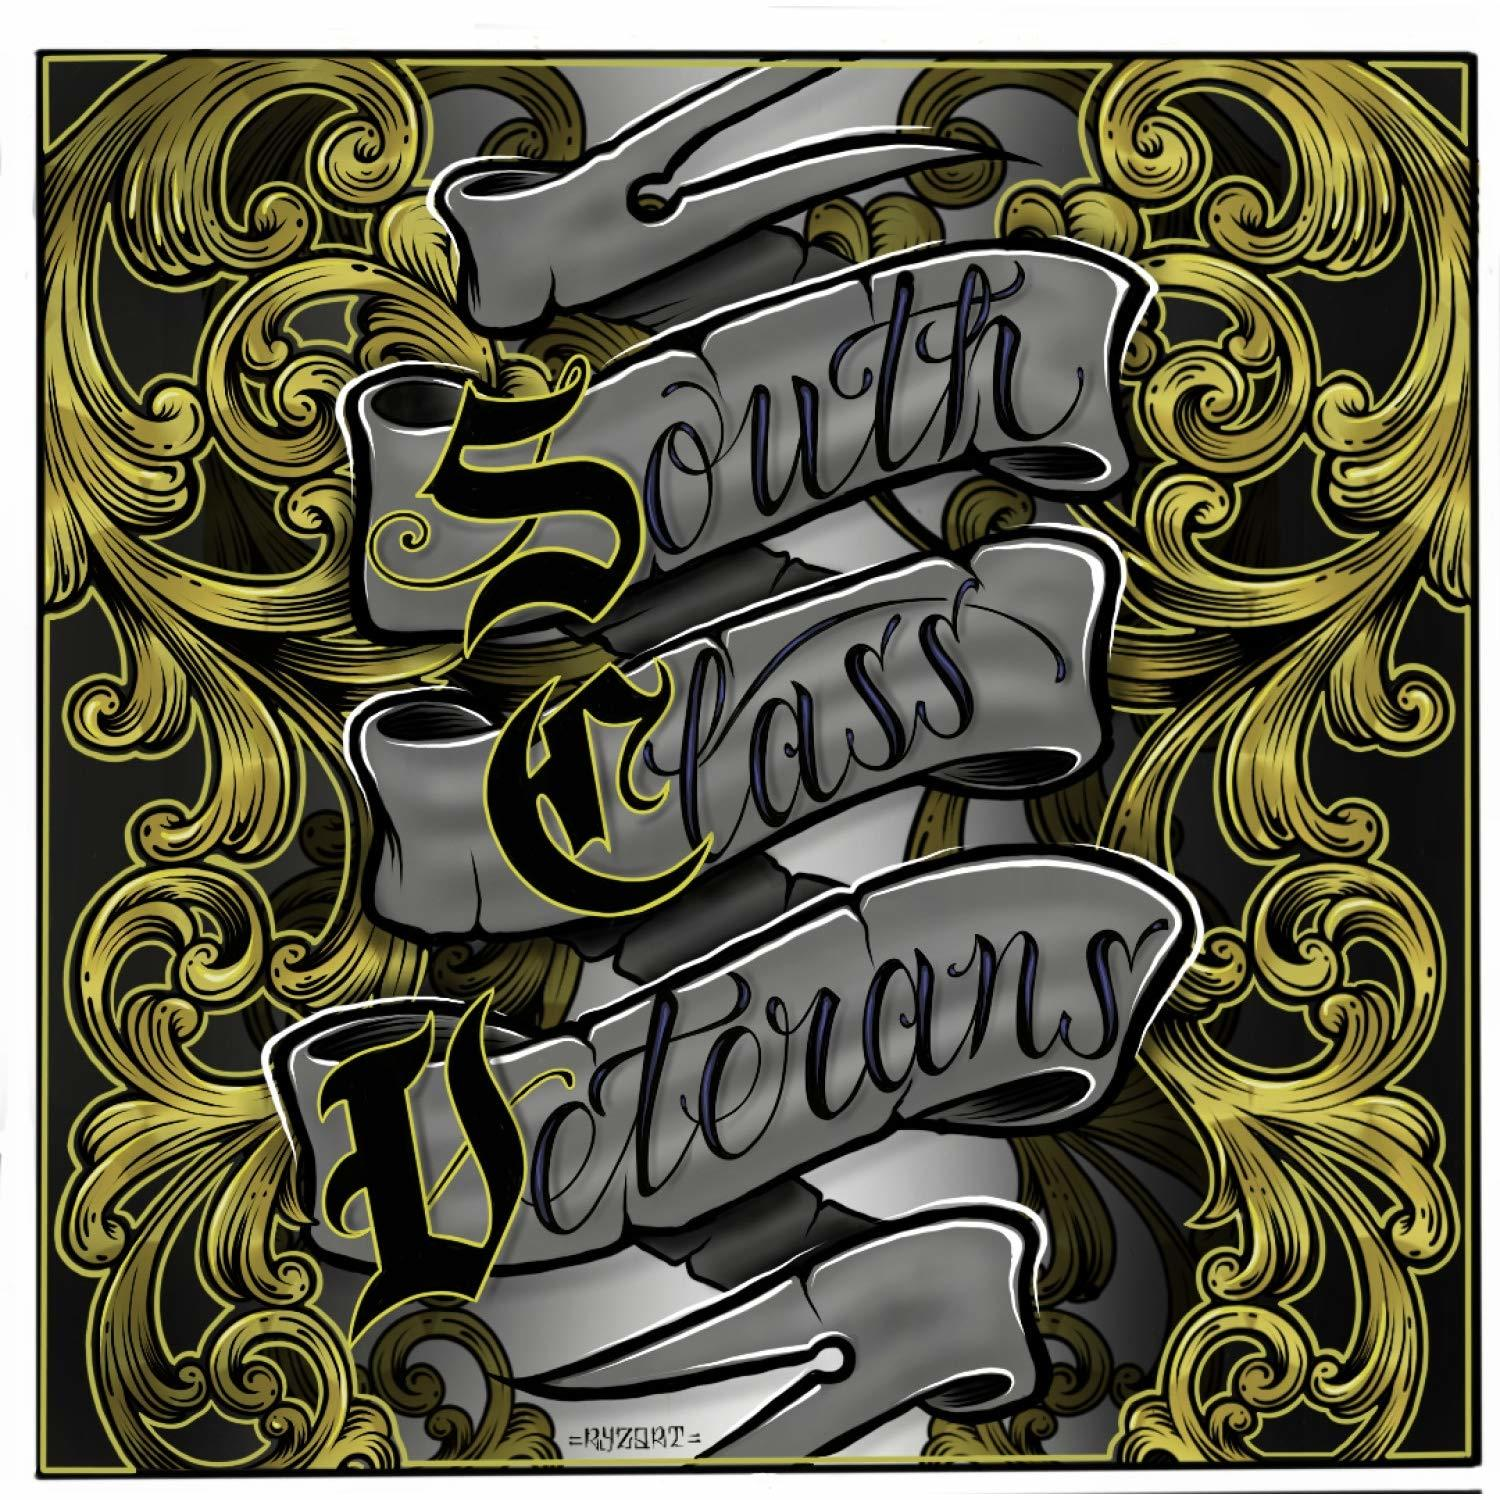 South Class Veterans - (CD) - Hell To Pay